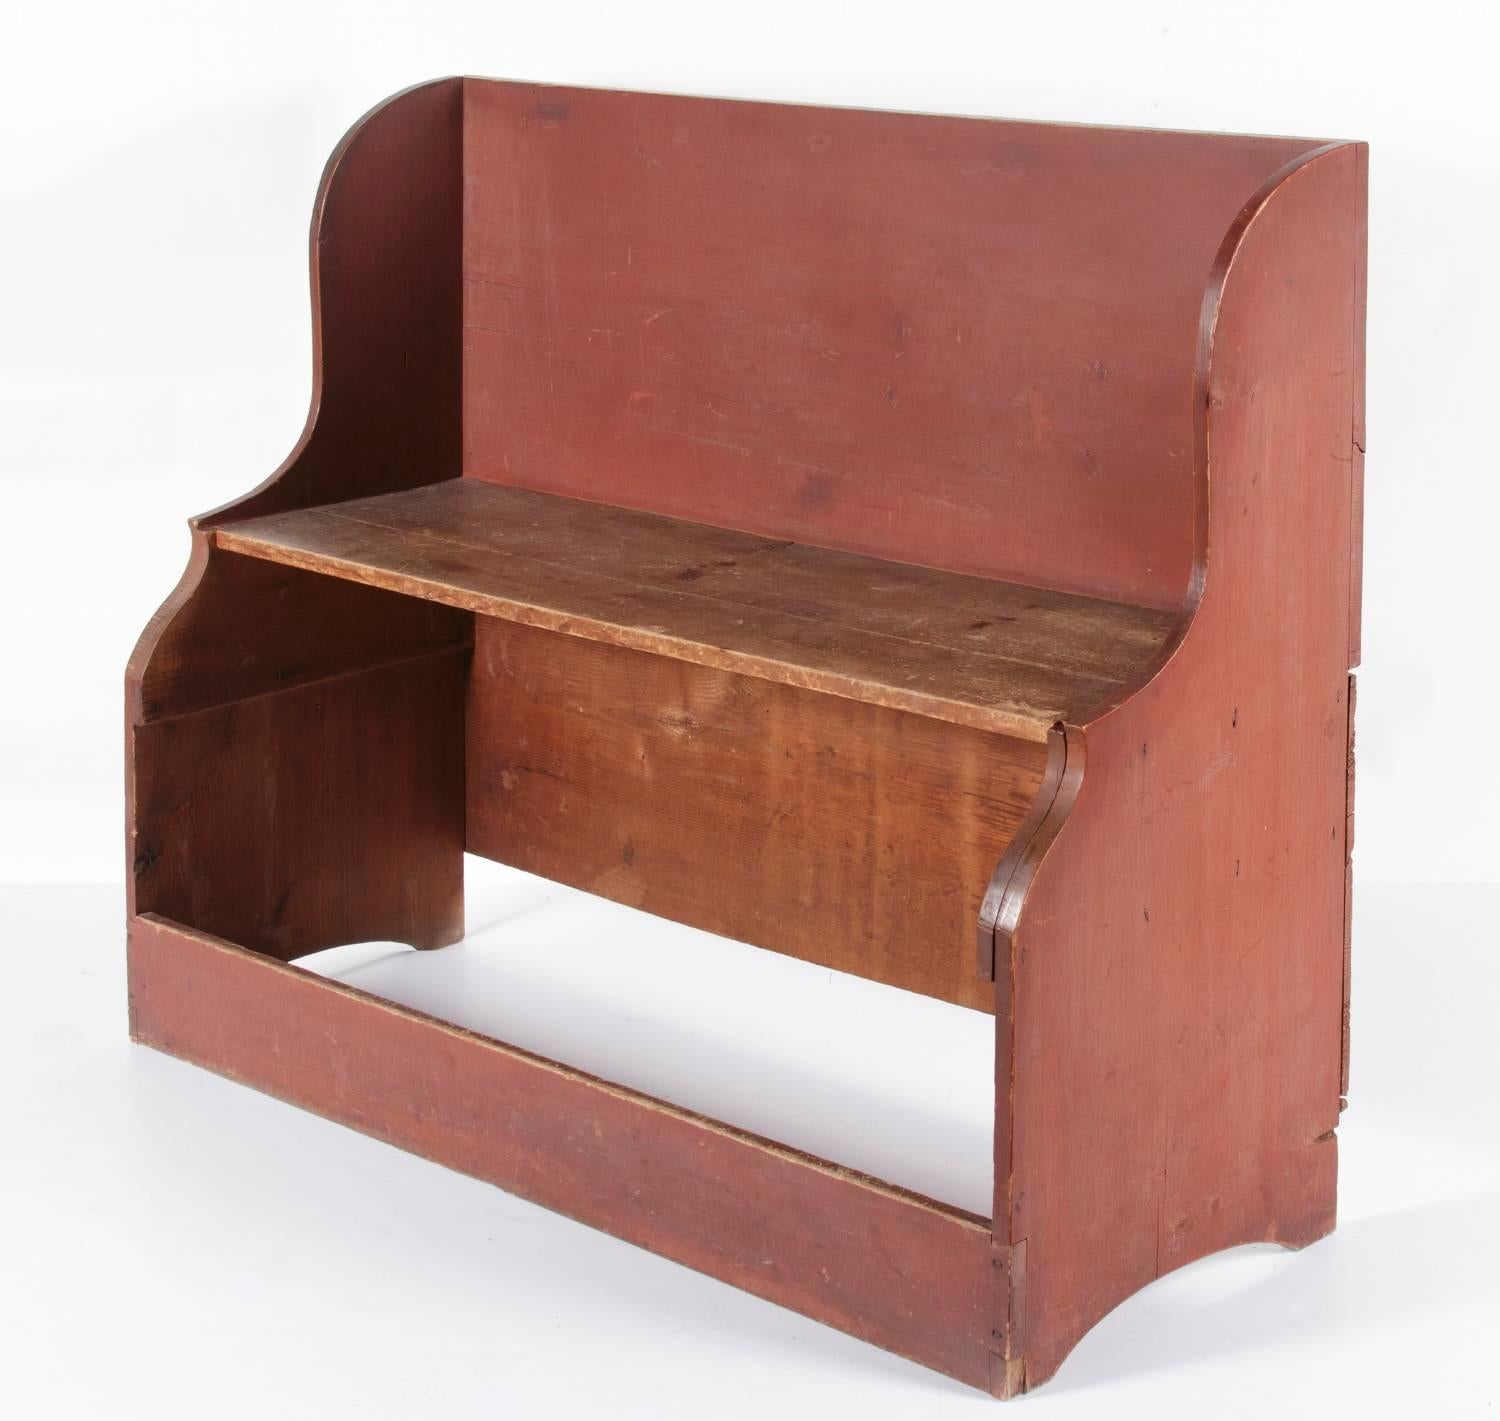 UNUSUAL DEACONS BENCH / BUCKET BENCH IN DRY SALMON RED PAINT, PROBABLY OF NEW ENGLAND ORIGIN, CA 1830-50:

Call it a settle bench, bucket bench, or simply a high-back bench. Whatever the case may be, it is a graceful and highly unusual piece of